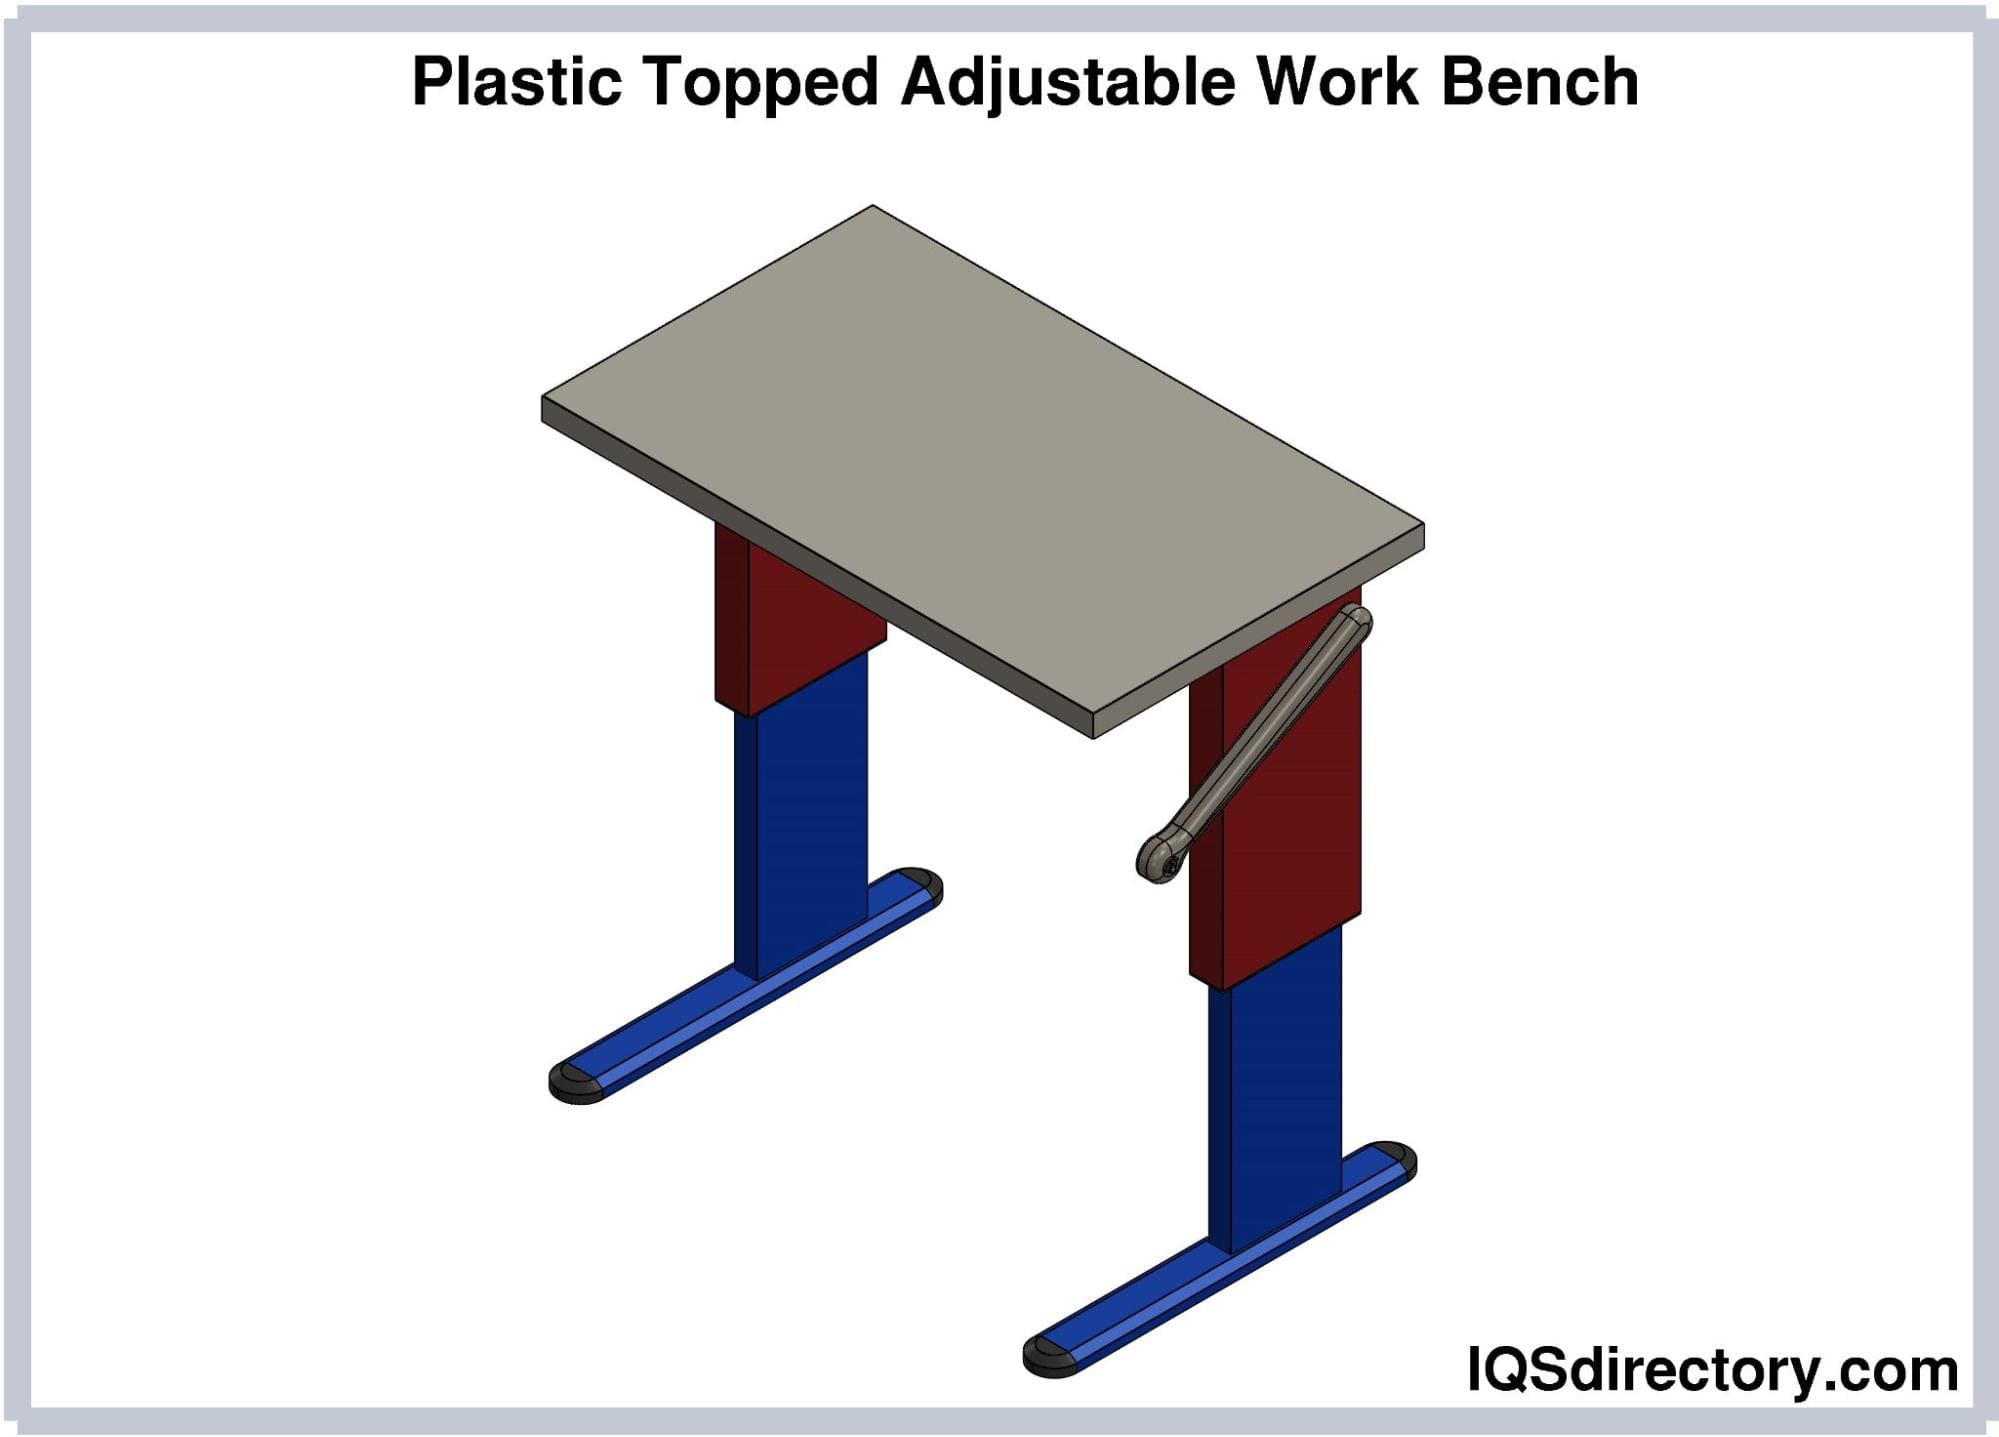 Plastic Topped Adjustable Work Bench